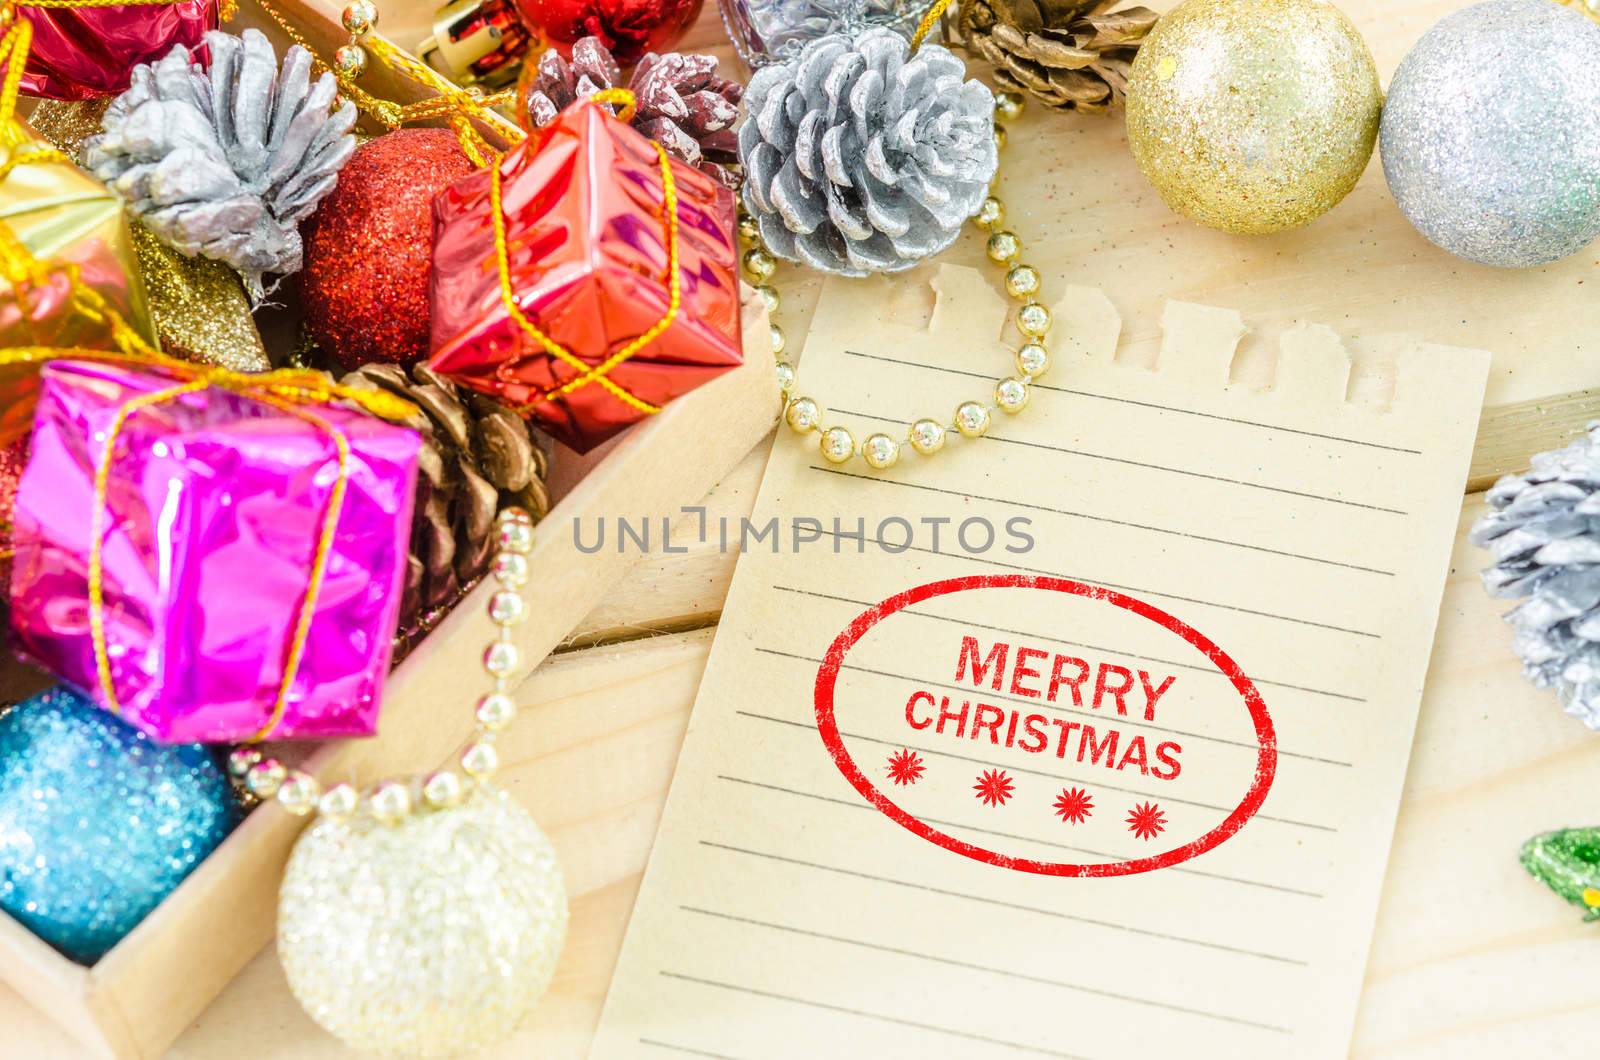 Banner and logo saying merry christmas on brown paper with christmas decorations on wood background.